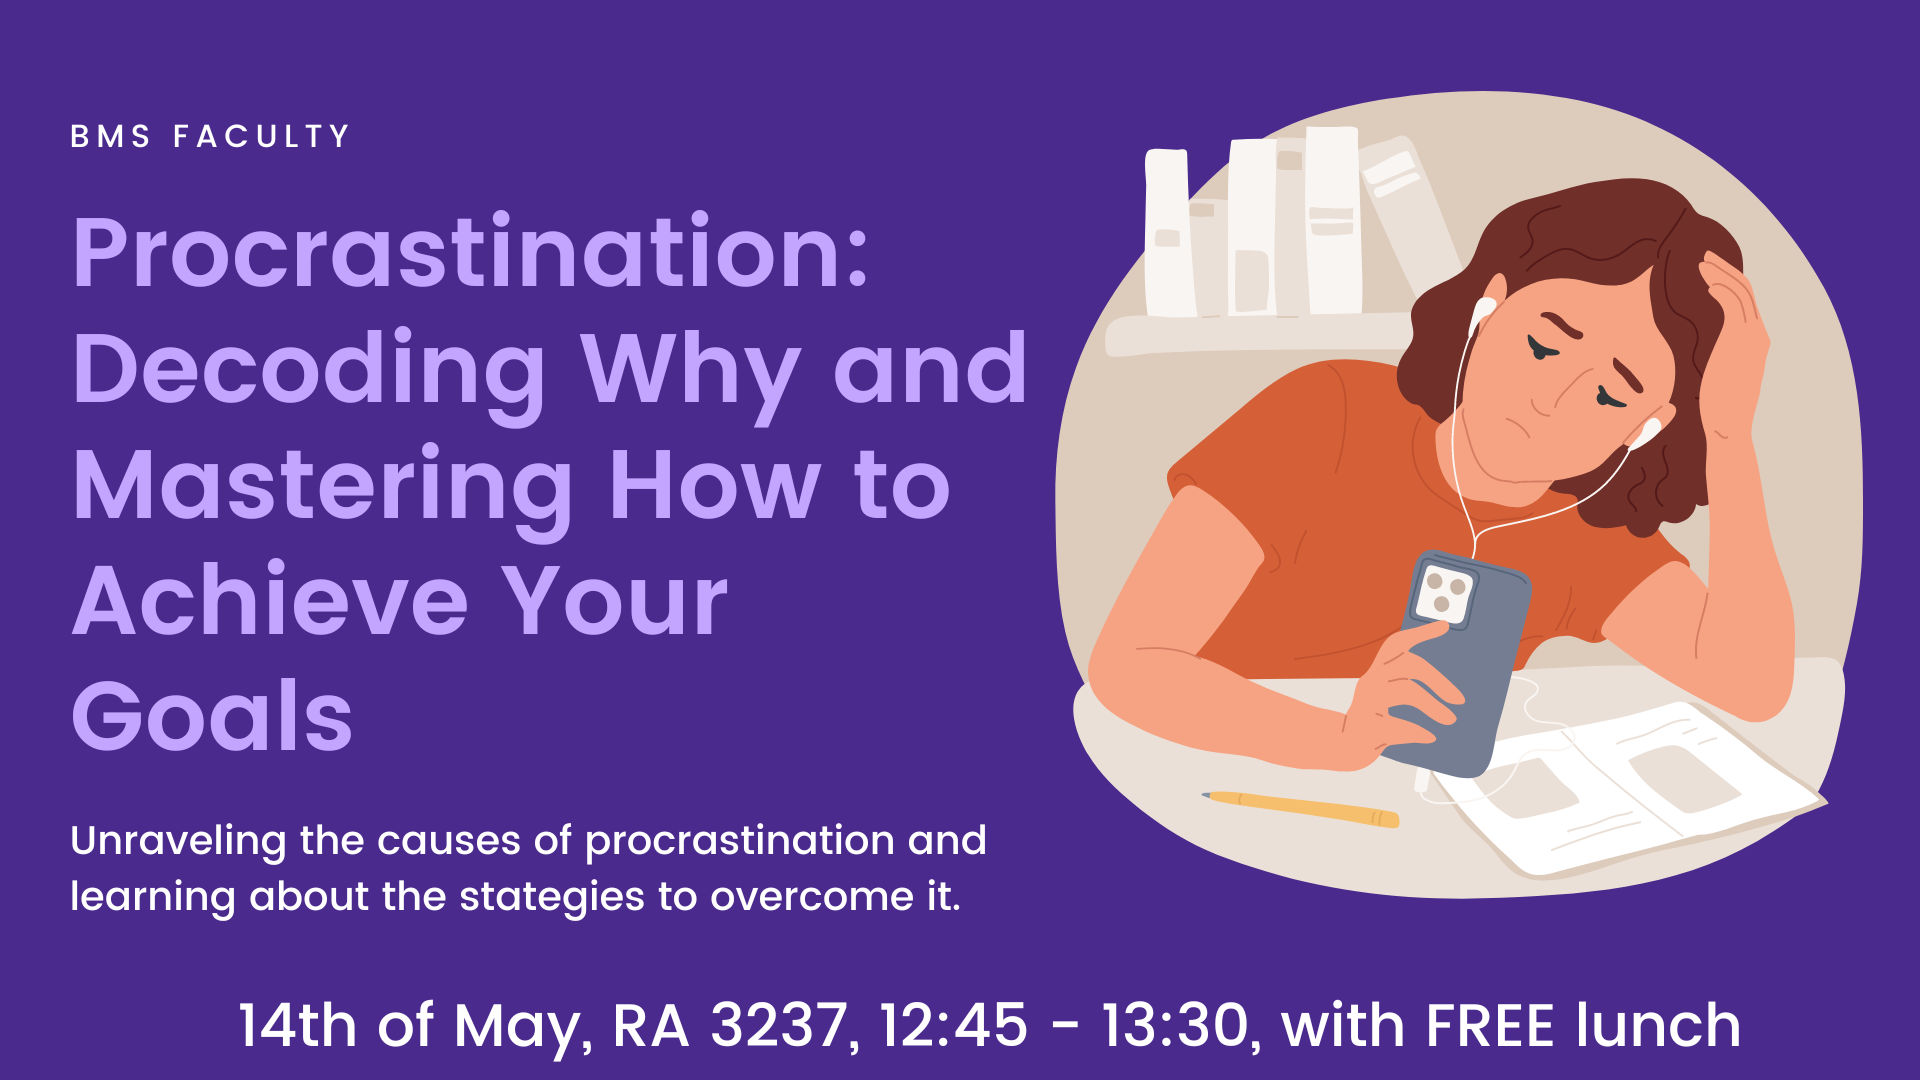 BMS Input Session: Procrastination - Decoding Why and Mastering How to Achieve Your Goals